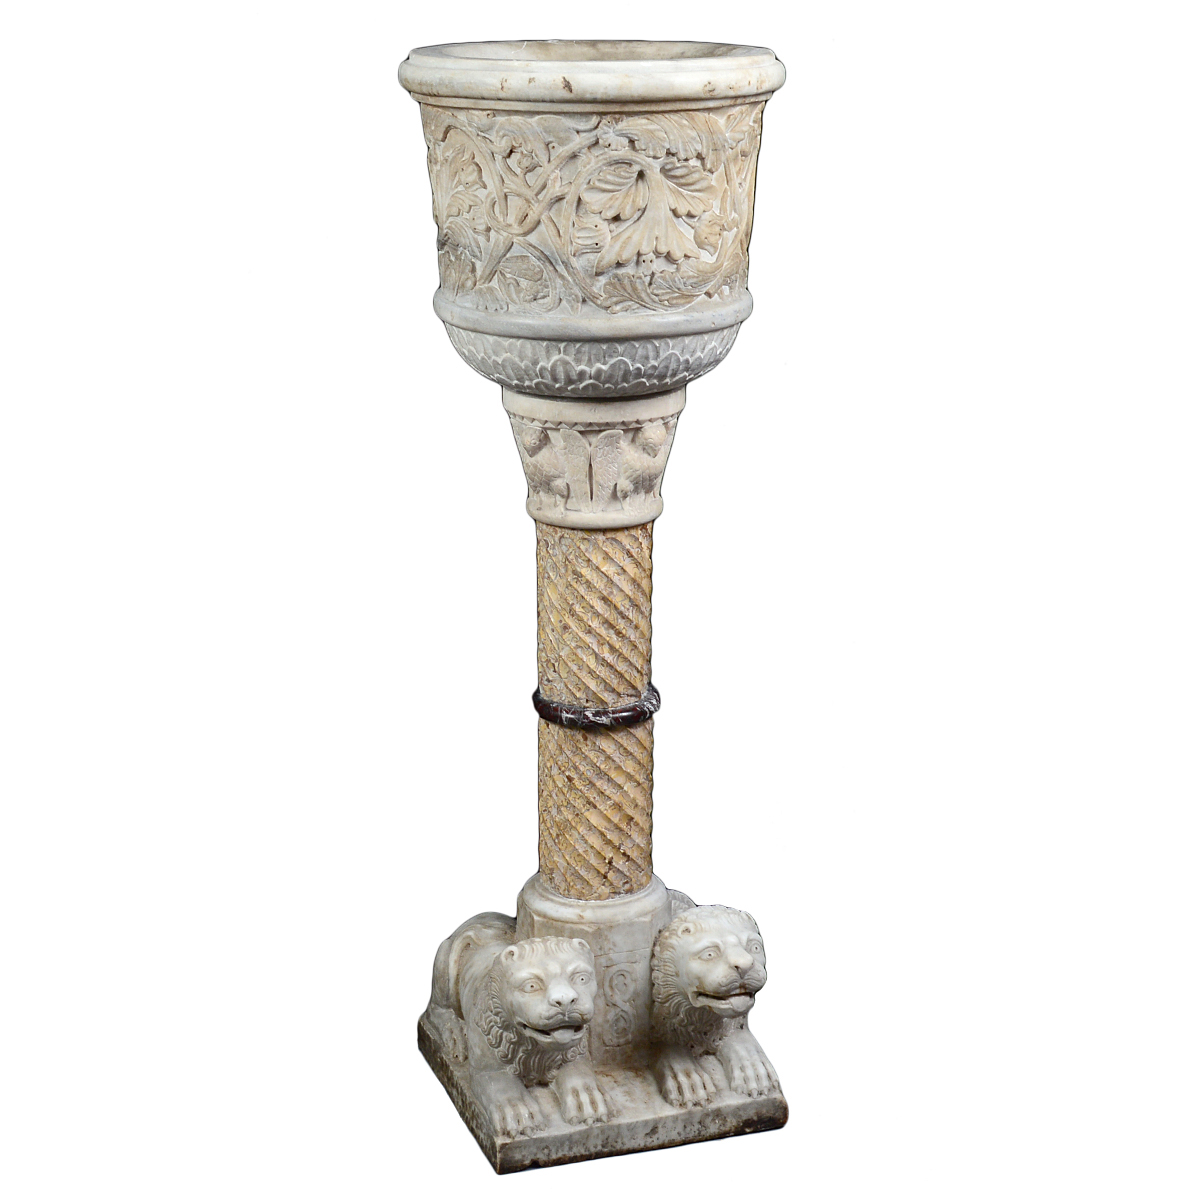 19th century English alabaster jardinière on pedestal. Auction Gallery of the Palm Beaches image